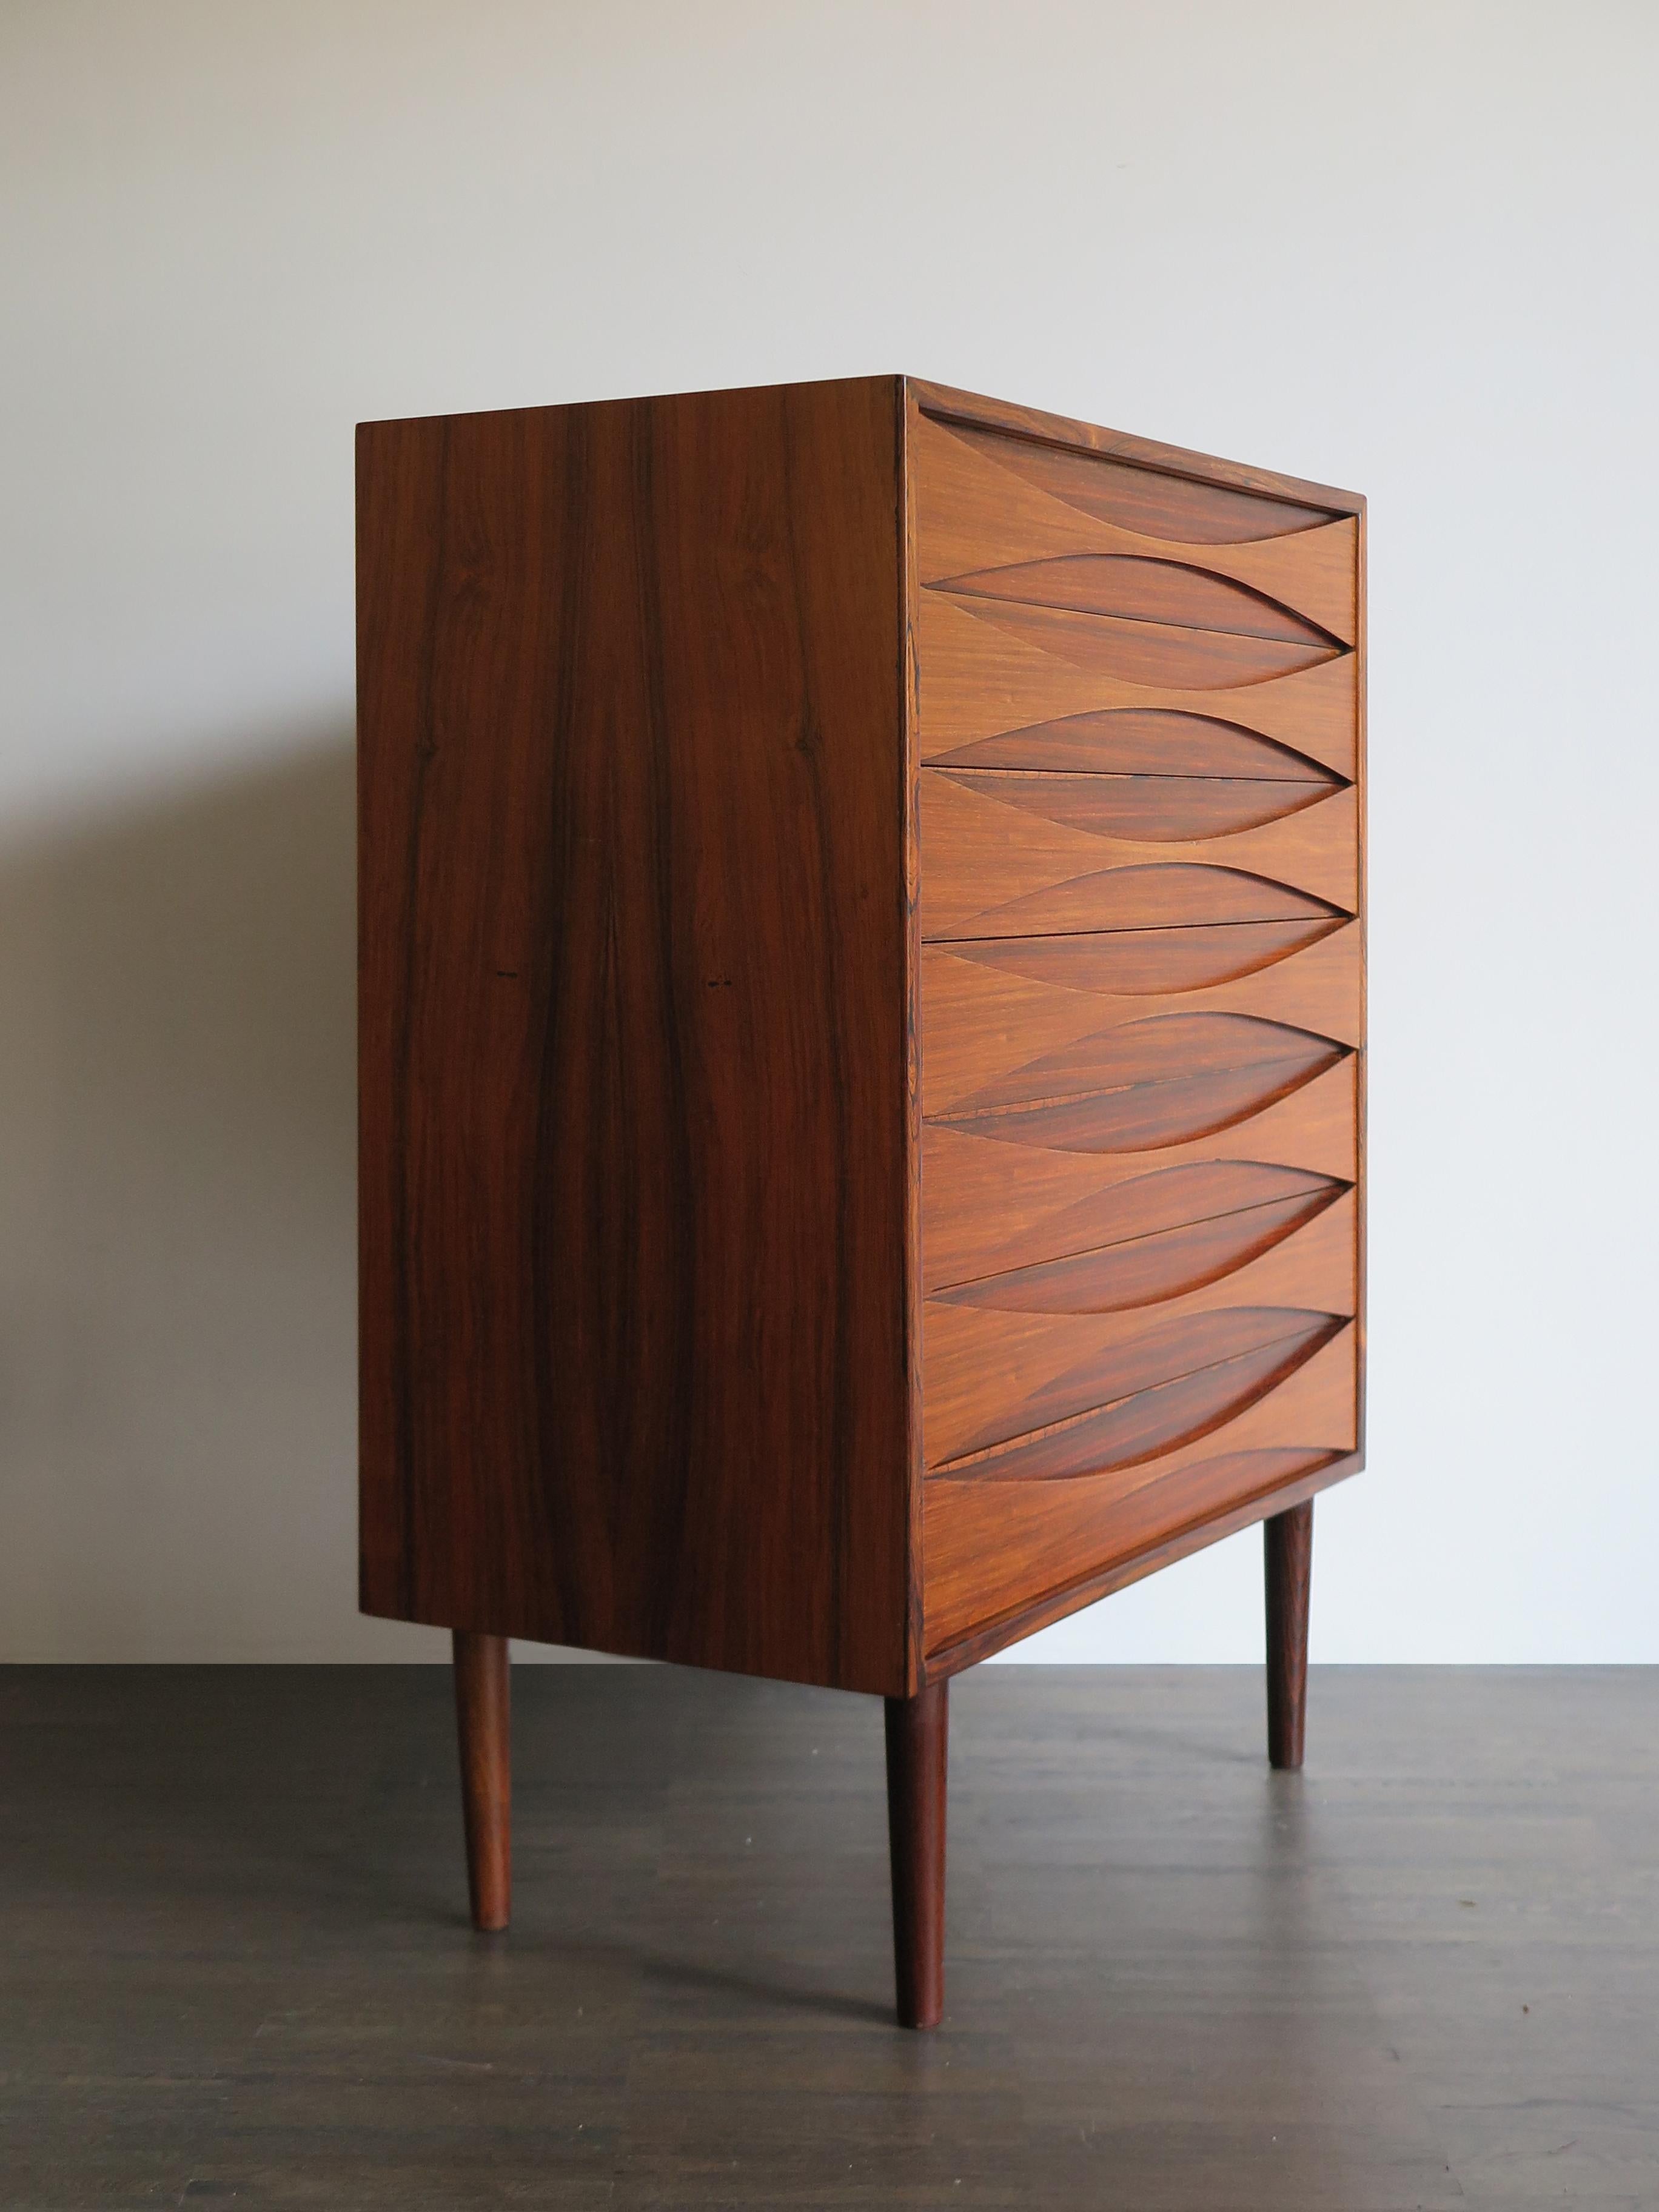 Famous and very rare Danish Mid-Century Modern design dark wood chest of drawers designed by Arne Vodder for N.C Møbler, 1950s

Please note that the item is original of the period and this shows normal signs of age and use.